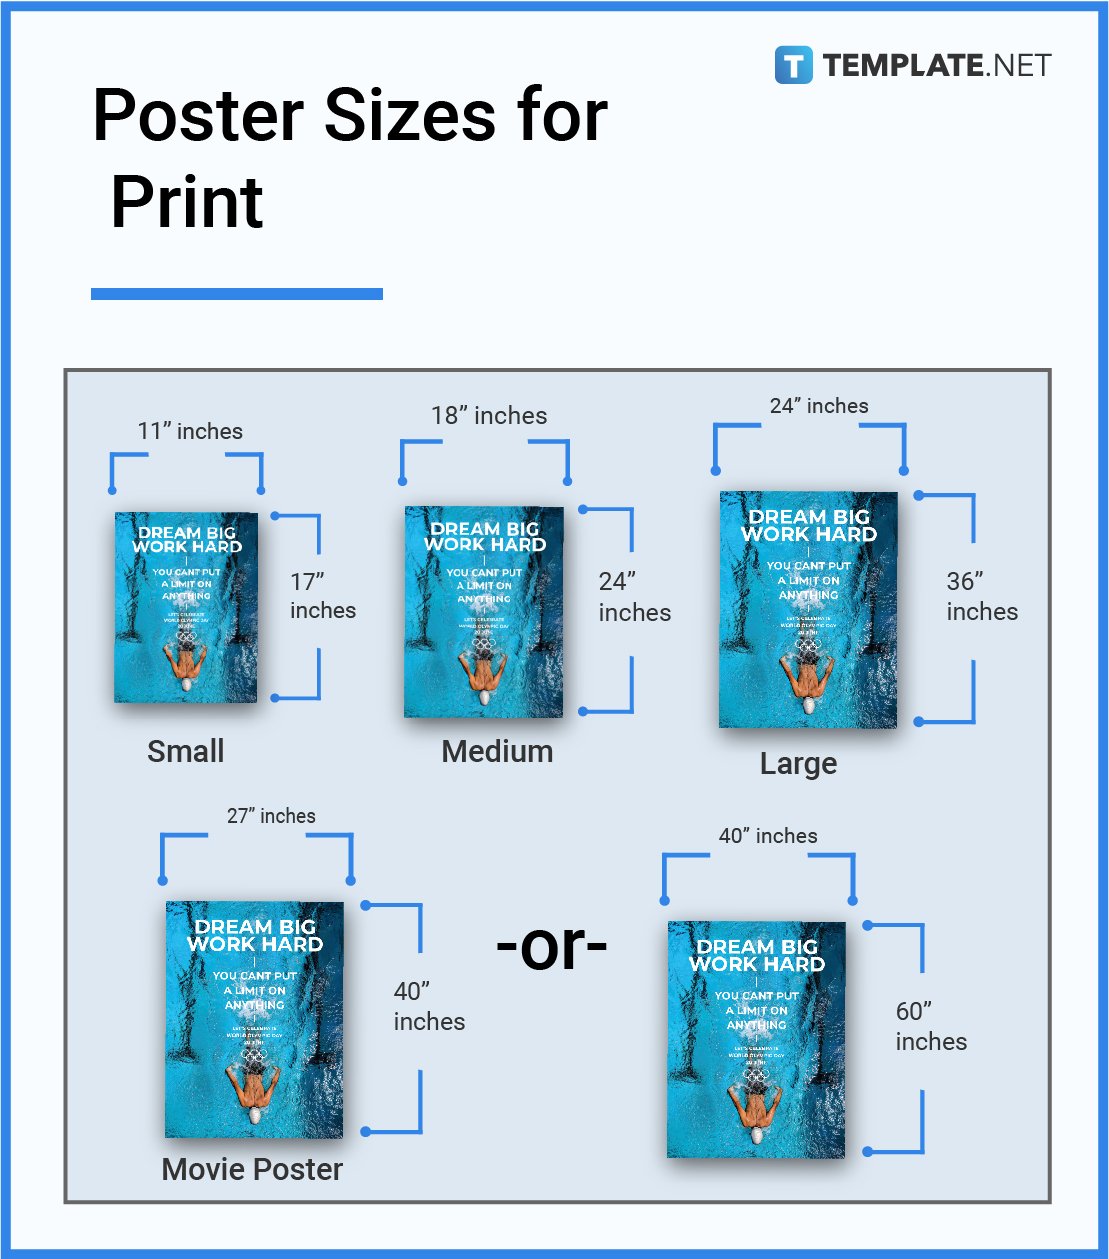 size of poster board